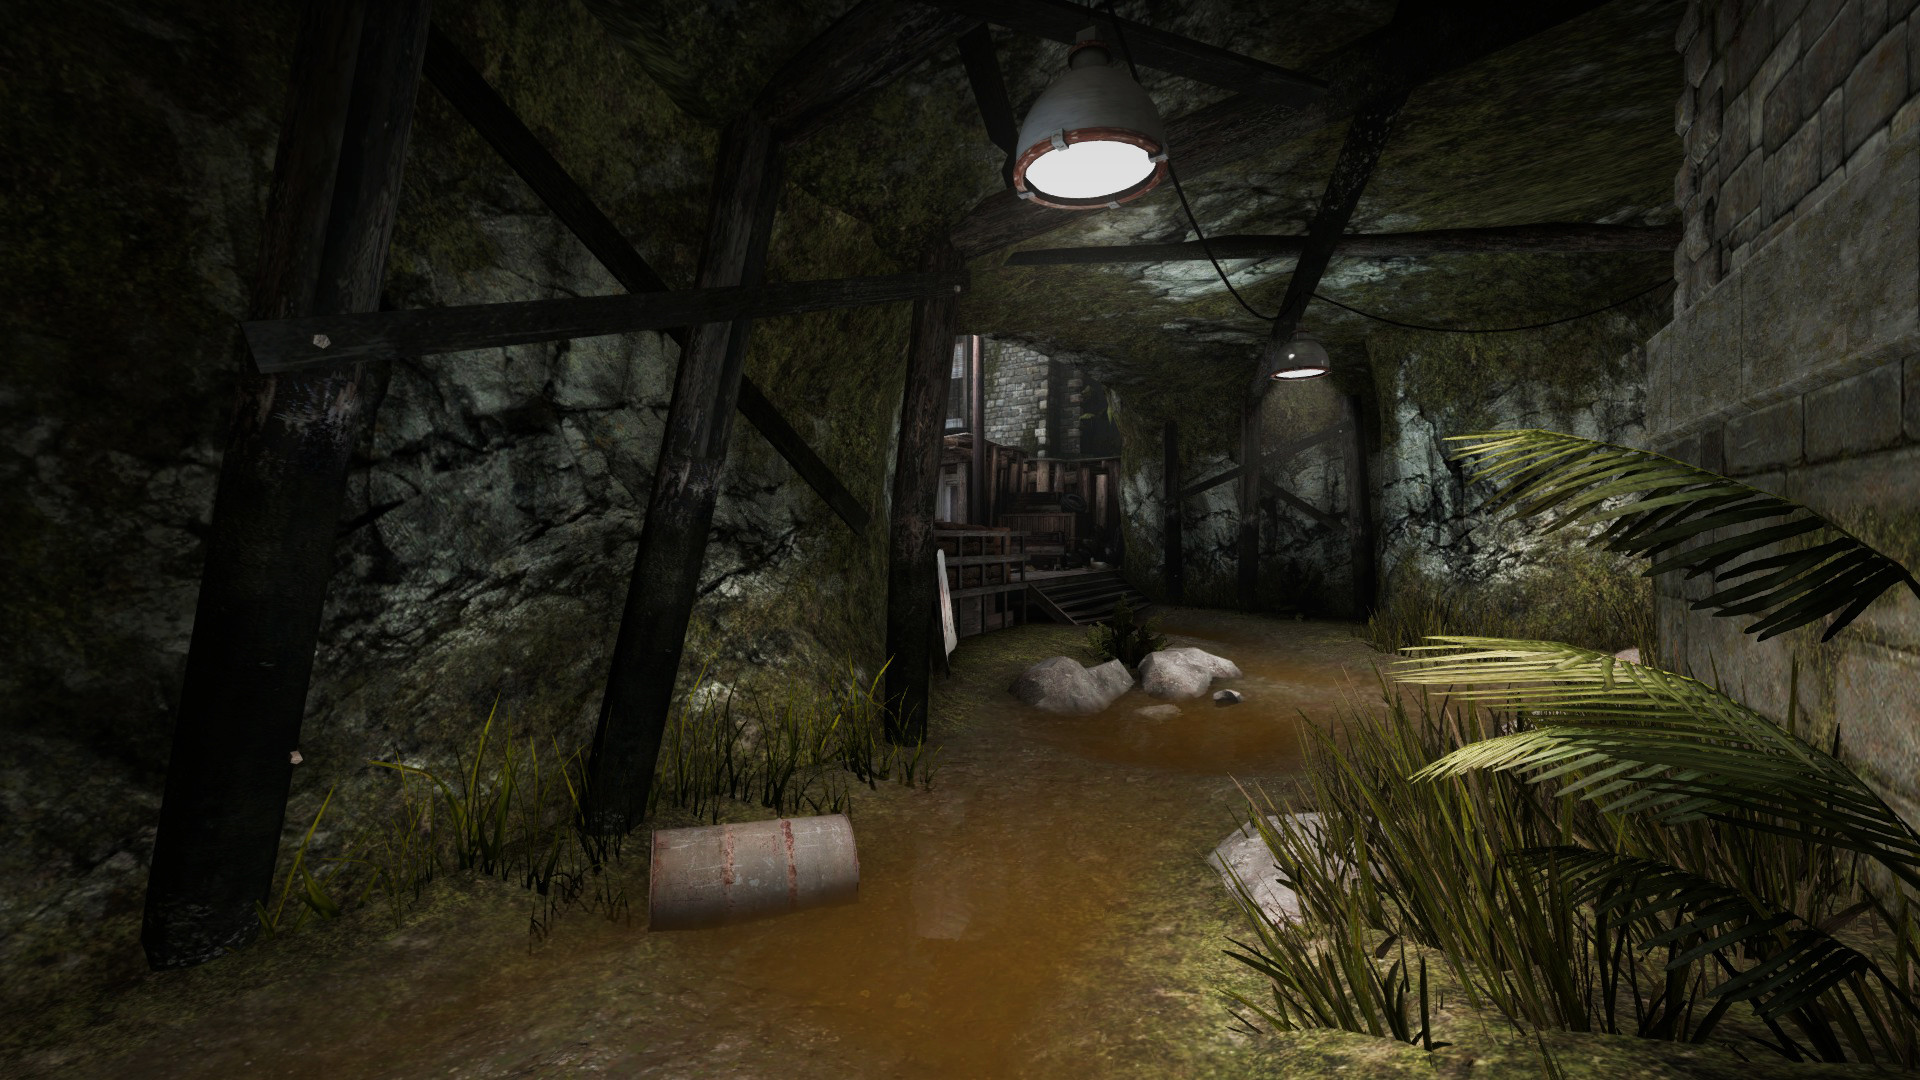 General 1920x1080 Counter-Strike: Global Offensive Map Counter-Strike: Global Offensive cave Valve Corporation video game landscape CGI Counter-Strike leaves lights video games Barrel water rocks video game art stairs